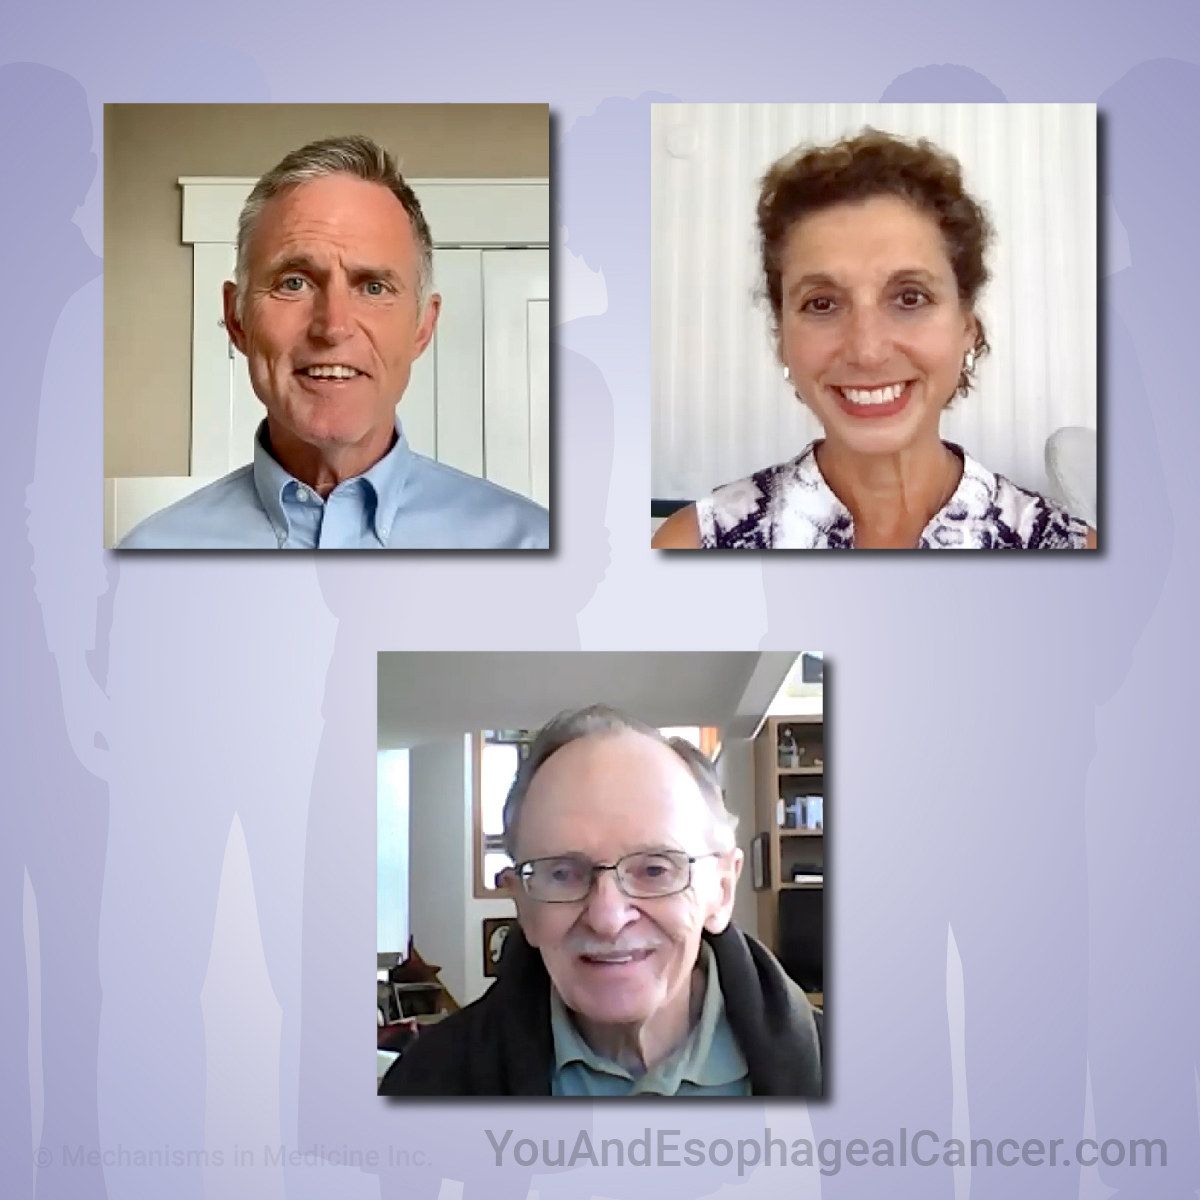 Hear from a variety of patients about their experience living with Esophageal Cancer